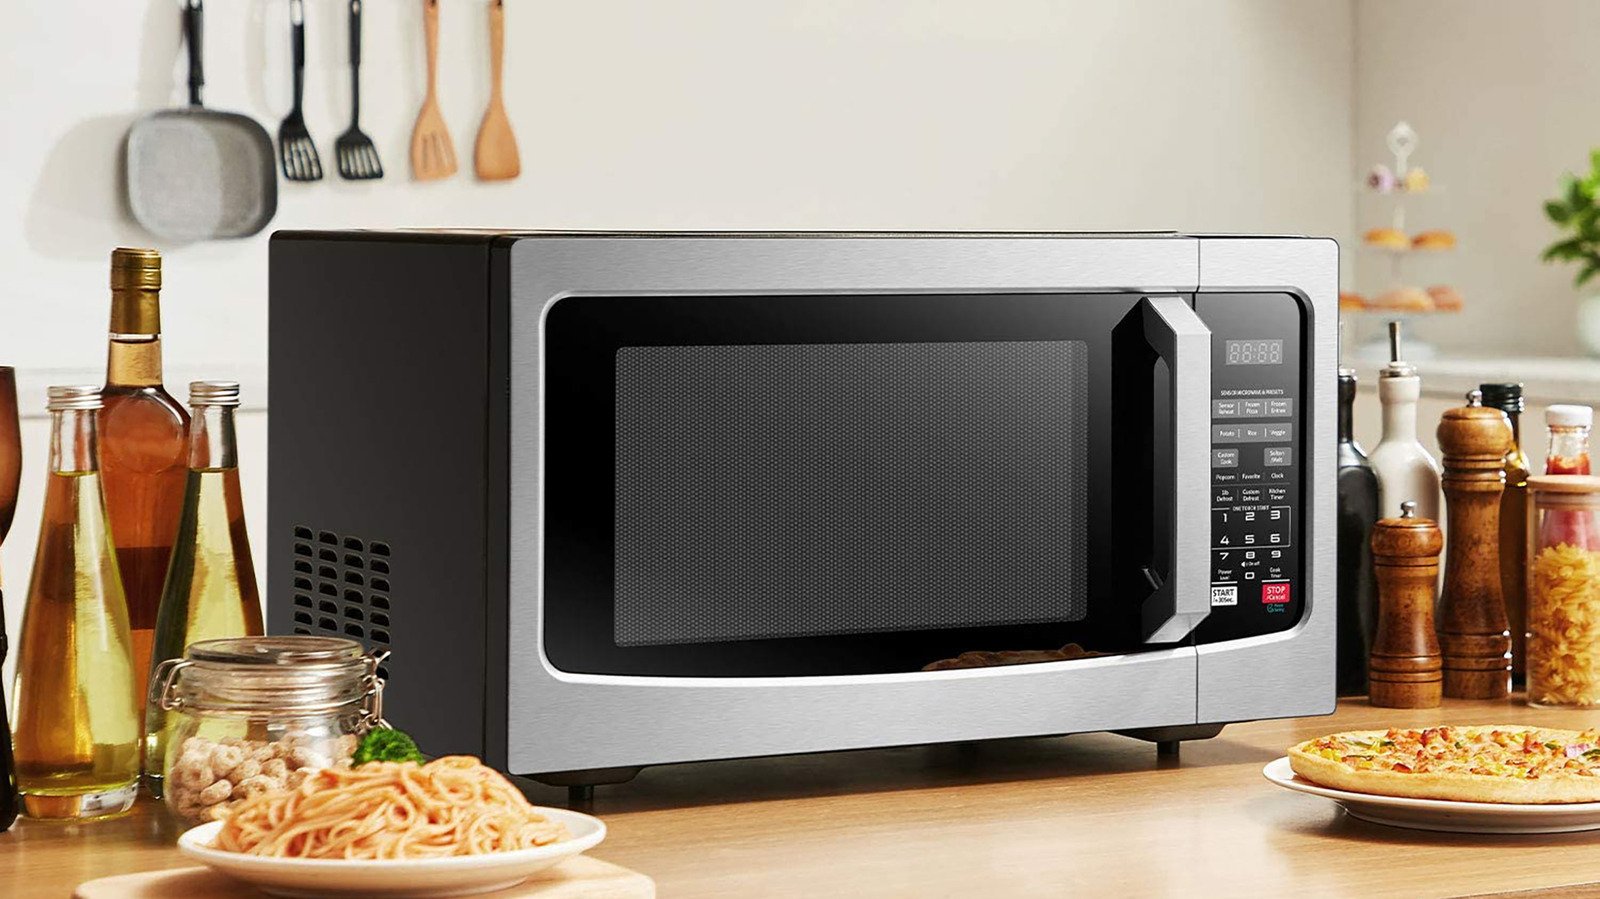 You Probably Didn't Know The Microwave In Your Home Can Do This - House Digest